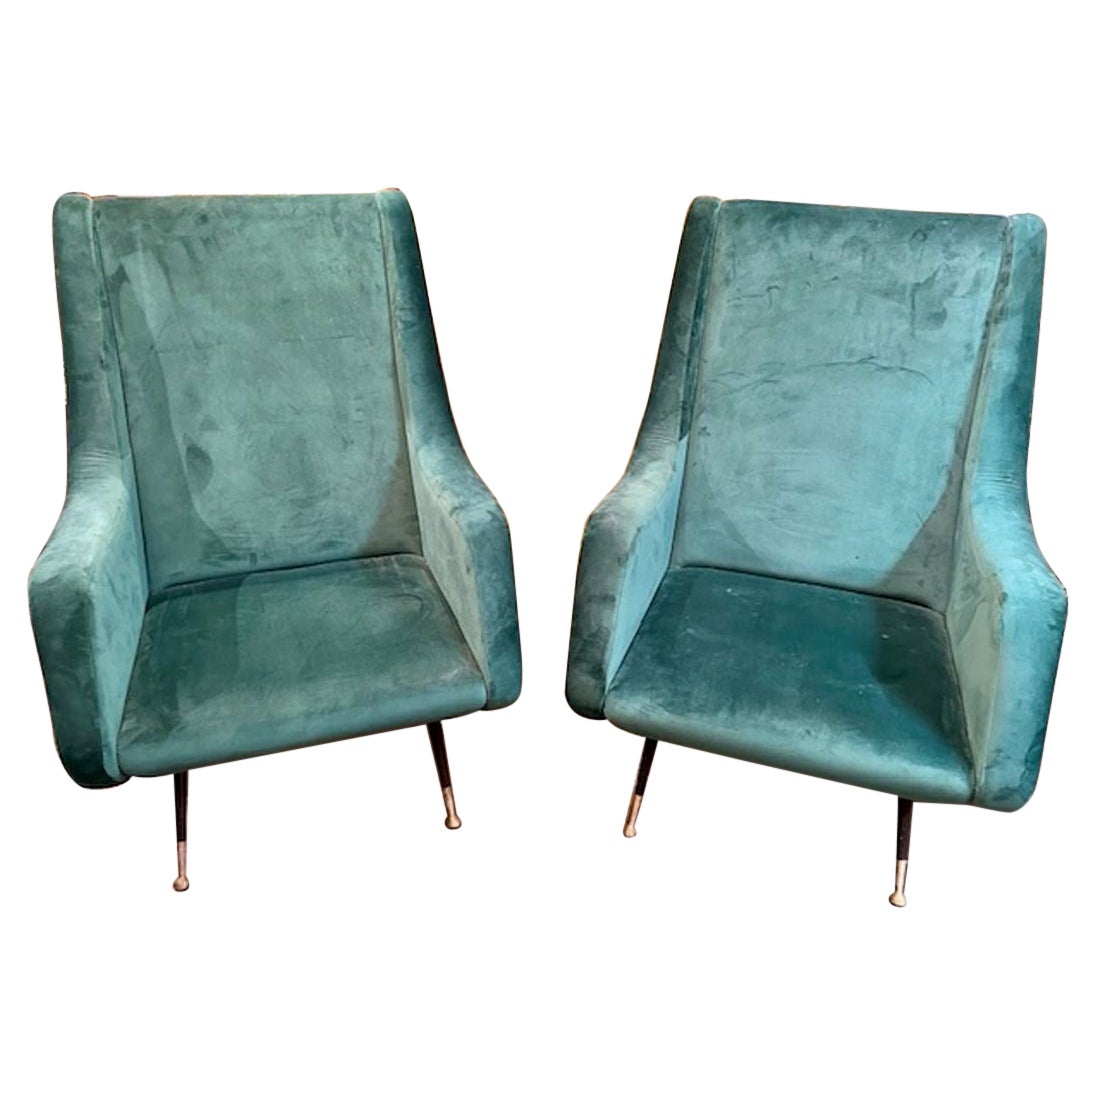 Pair of MCM Green Velvet Armchairs after Marco Zanuso For Sale